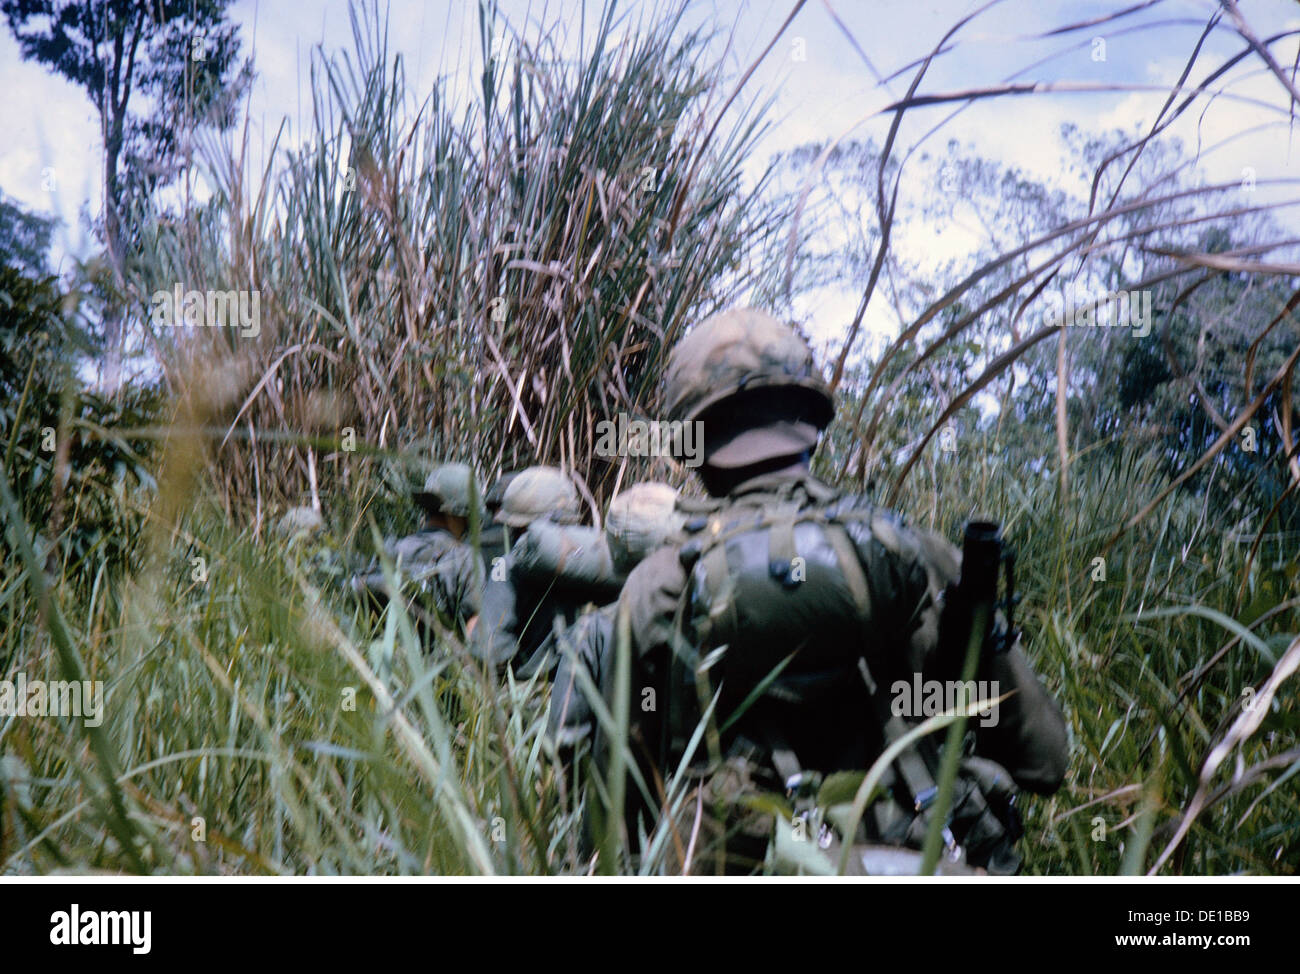 Vietnam War 1957 - 1975, American soldiers on patrol in the thicket, South Vietnam, 1965, almost impassable region, almost impassable, rough, undergrowth, grasses, high grass, military, armed forces, army, armies, USA, United States of America, South-East Asia, South East Asia, Southeast Asia, Far East, Viet Nam conflict, Viet Nam, Vietnam, war, wars, conflict, conflicts, 1960s, 60s, 20th century, people, men, man, male, soldiers, soldier, patrol, patrols, thicket, thickets, boscage, historic, historical, Additional-Rights-Clearences-Not Available Stock Photo